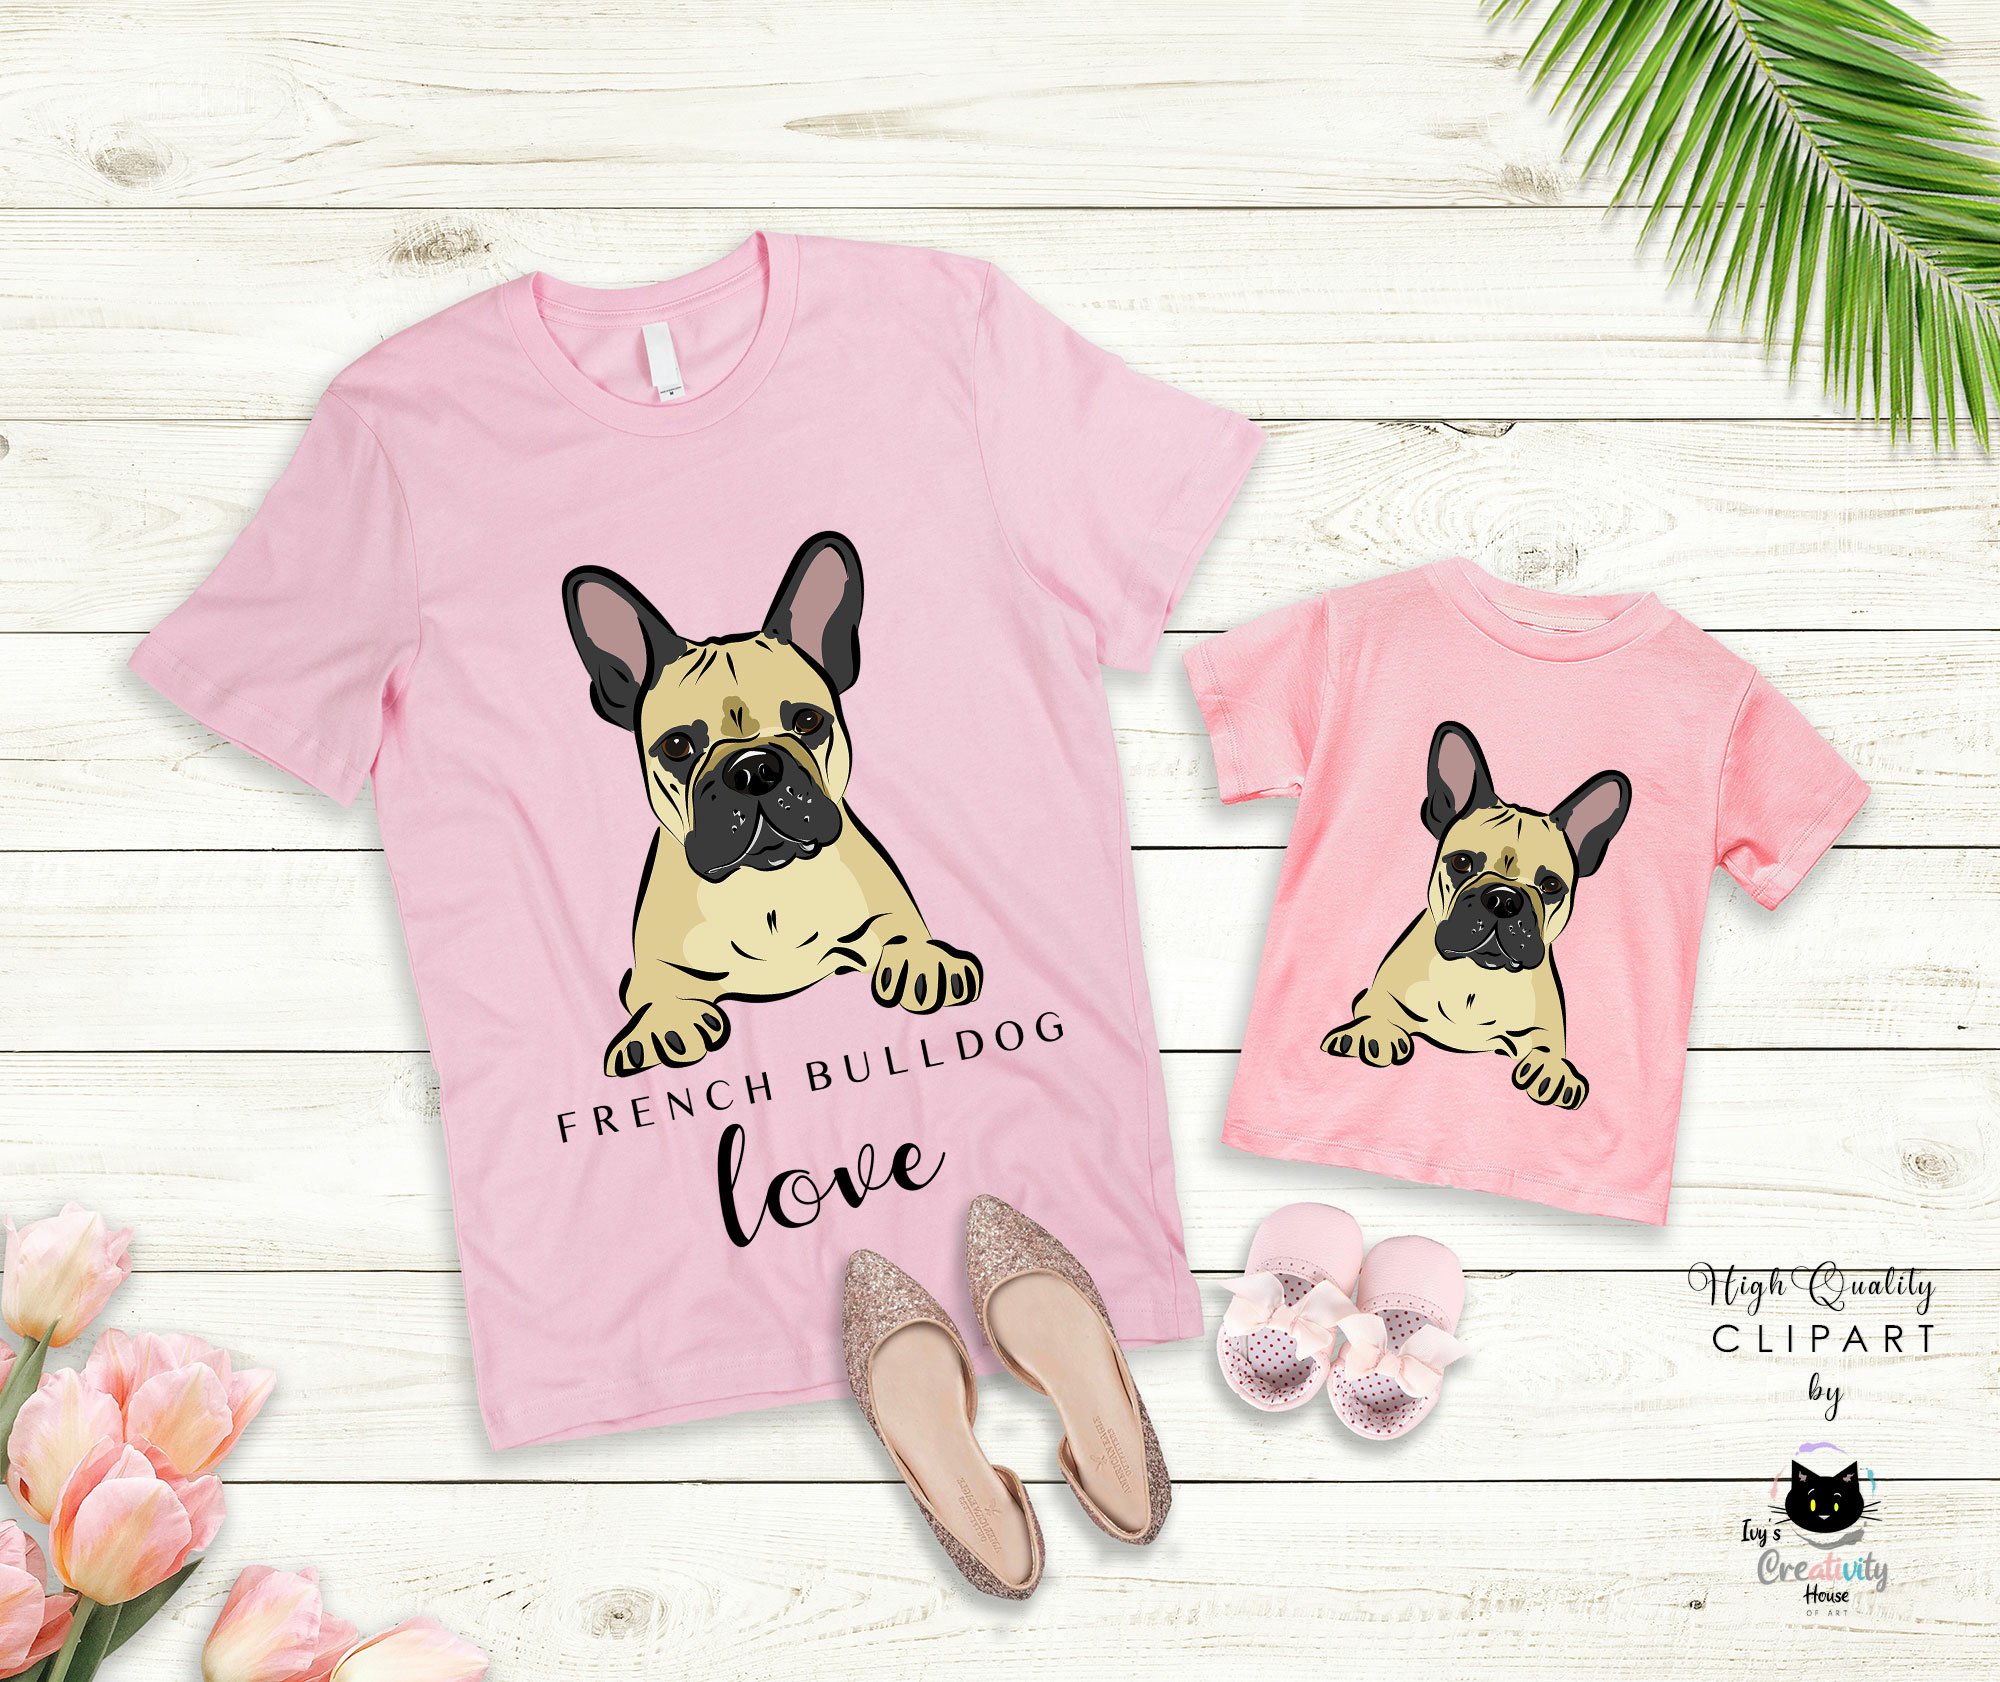 Pink shirt with a picture of a dog on it.